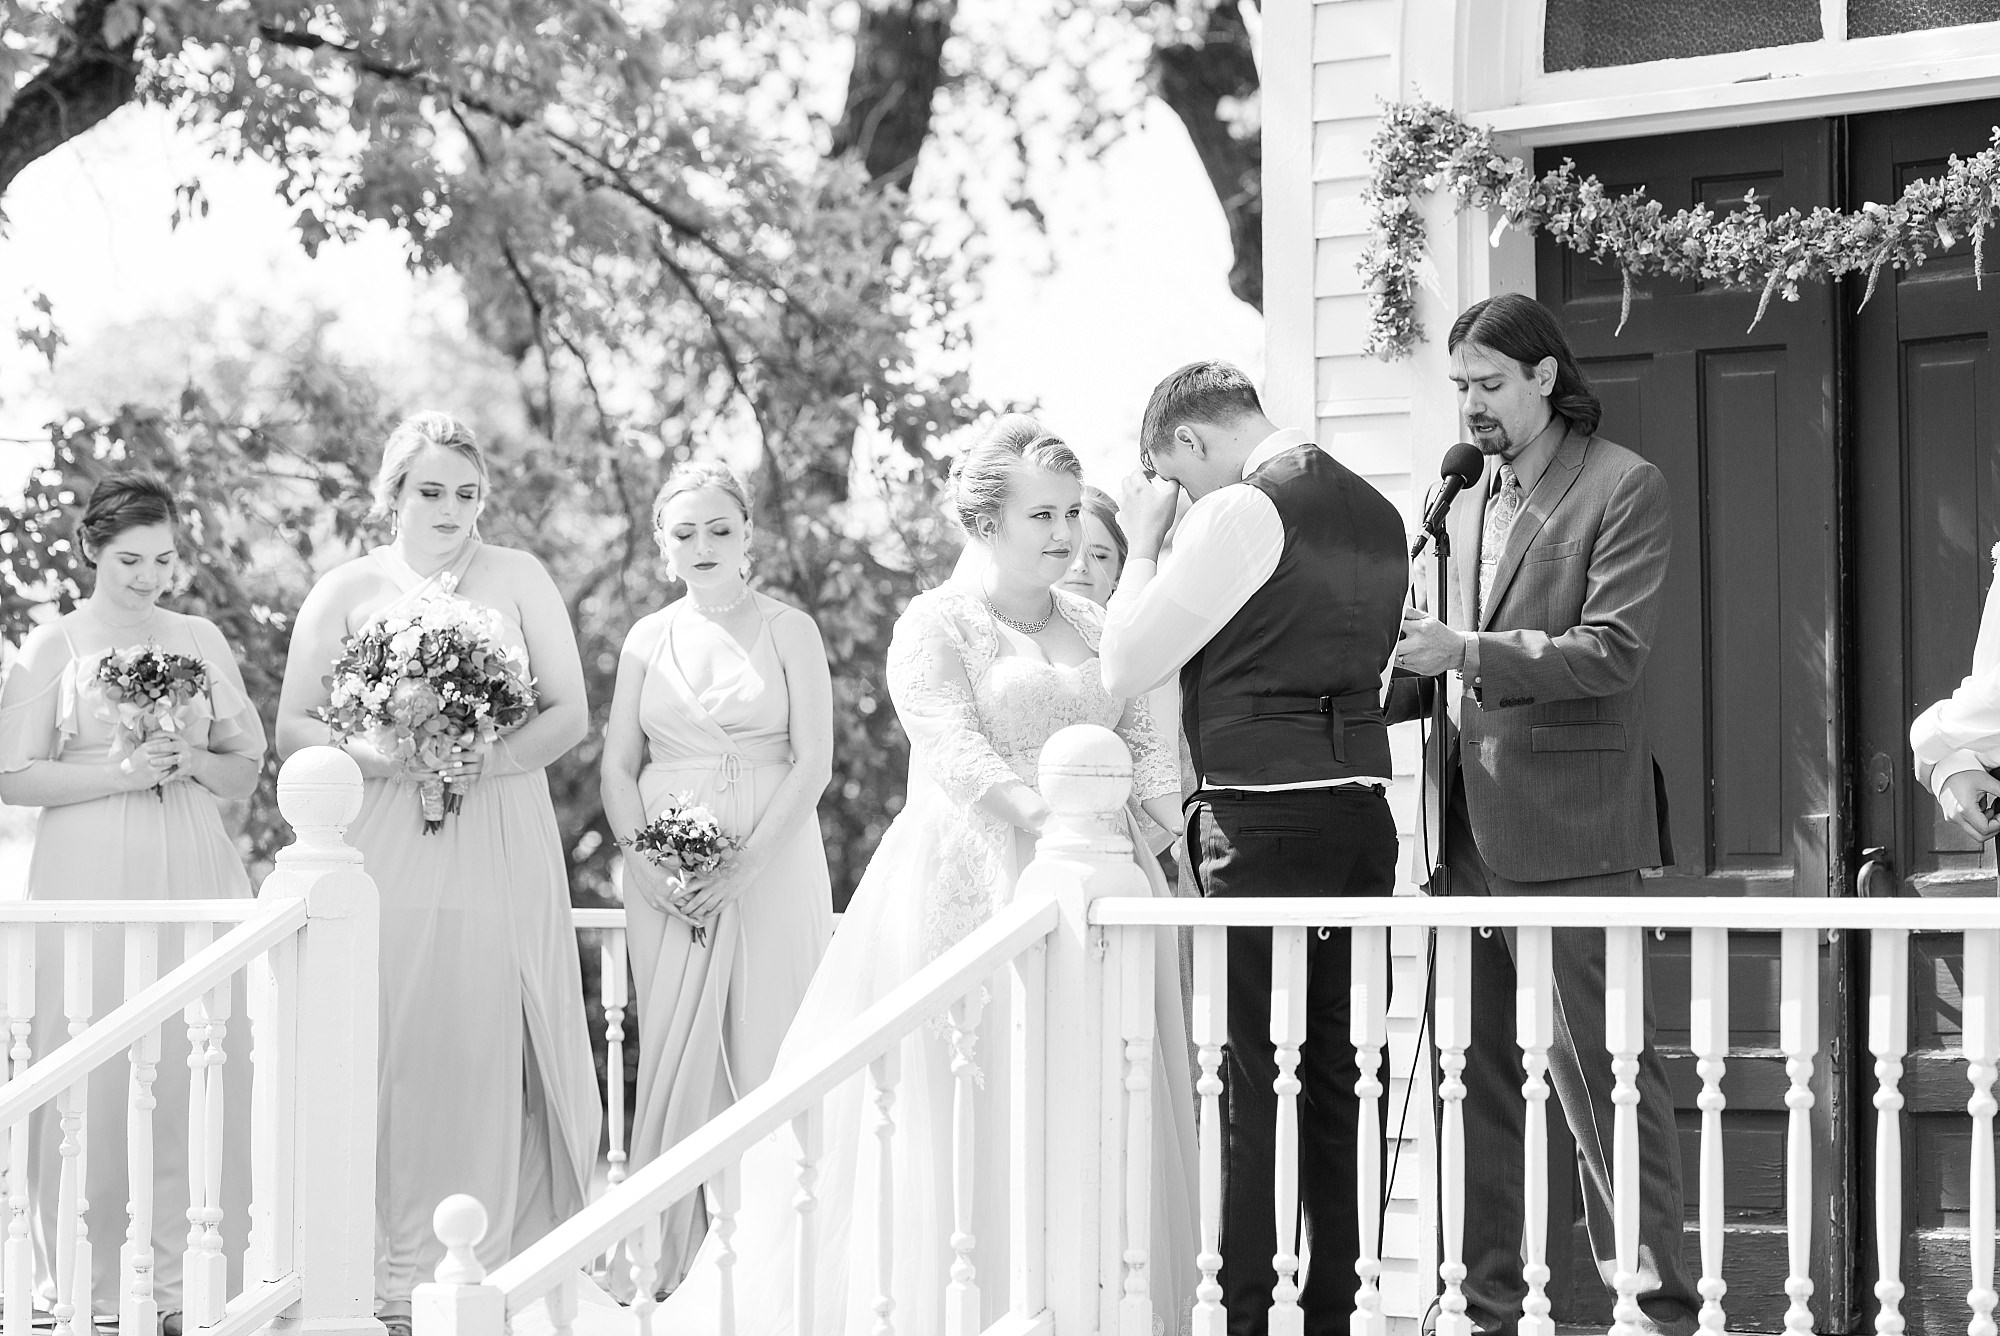 A groom wipes away a tear during an outdoor ceremony in front of a small church